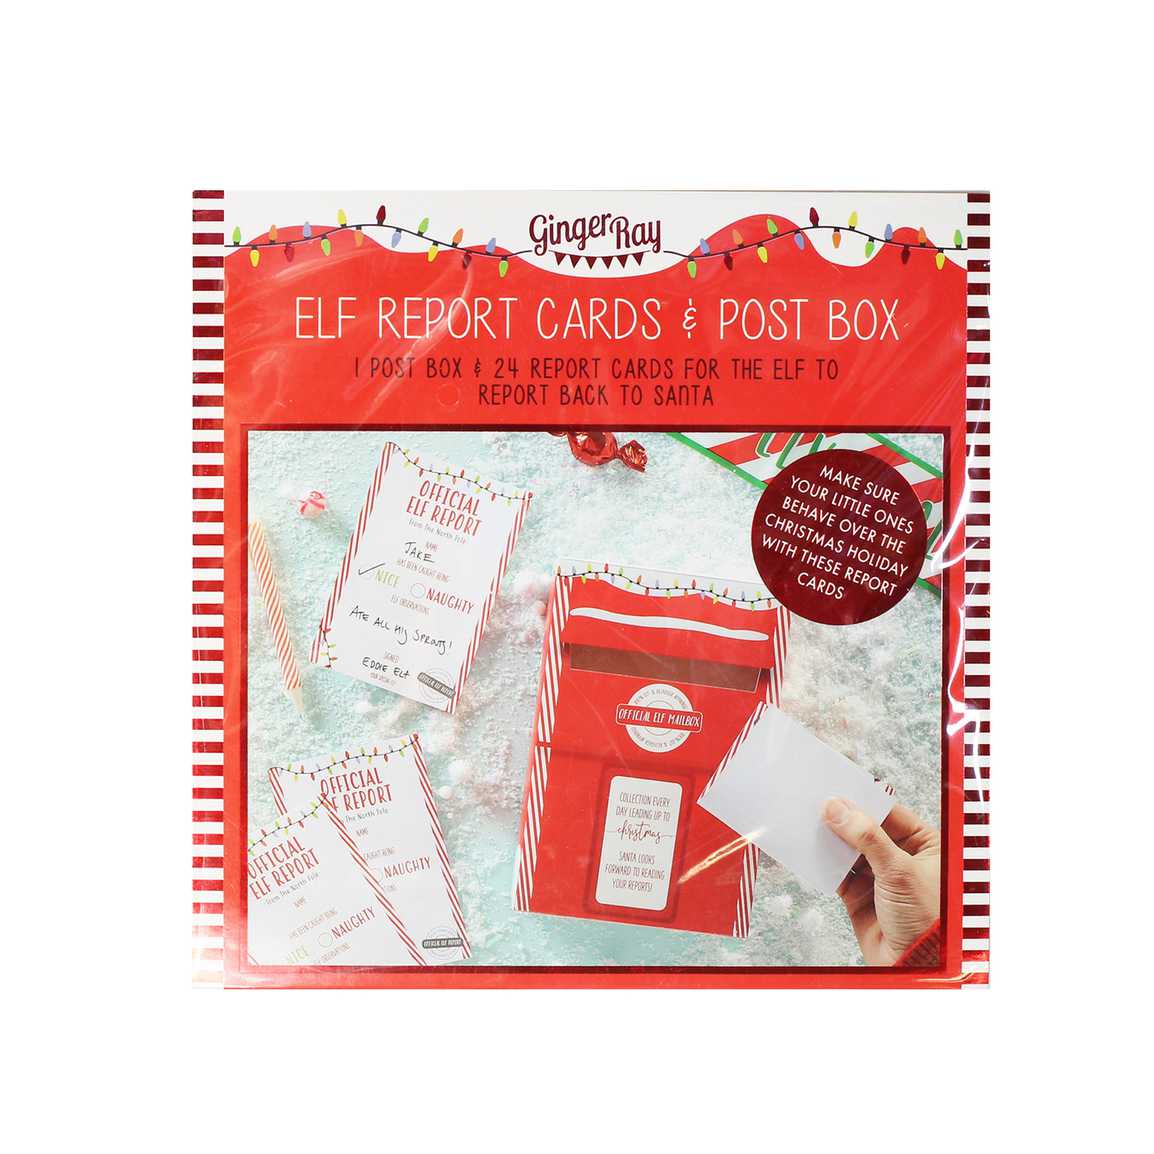 Elf Report Cards & Post Box - Novelty Christmas